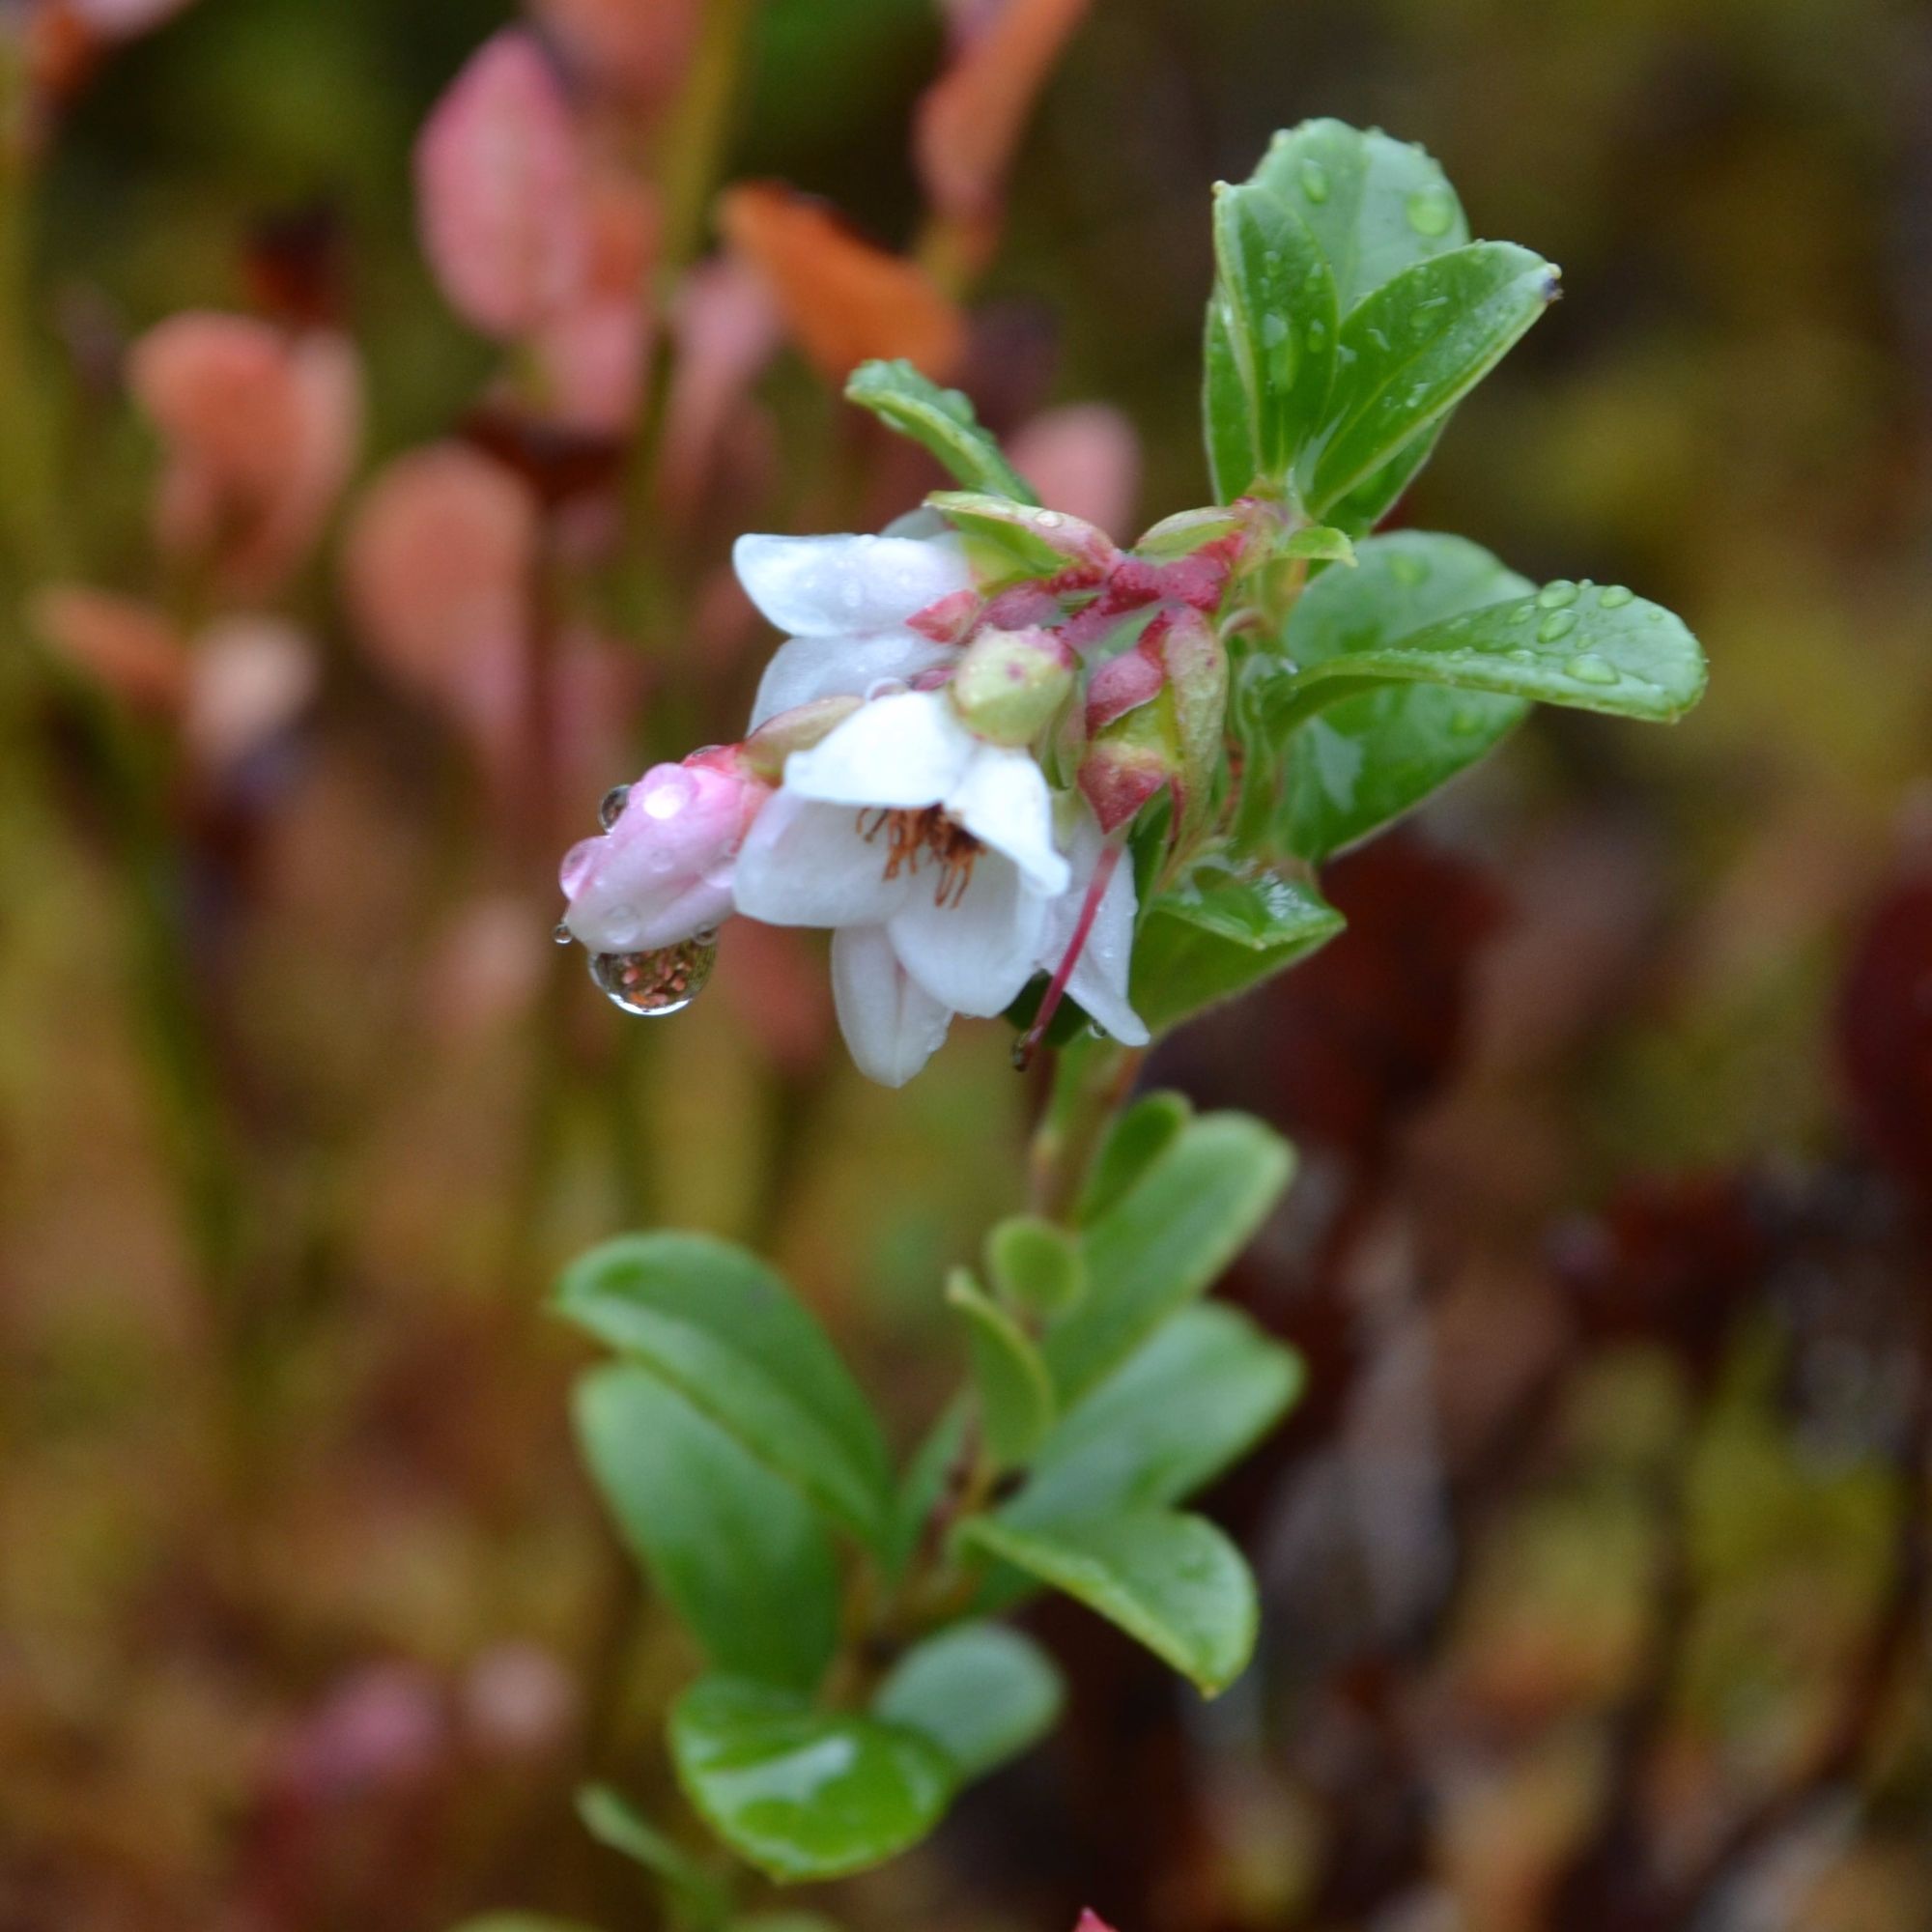 Flowers of cowberry